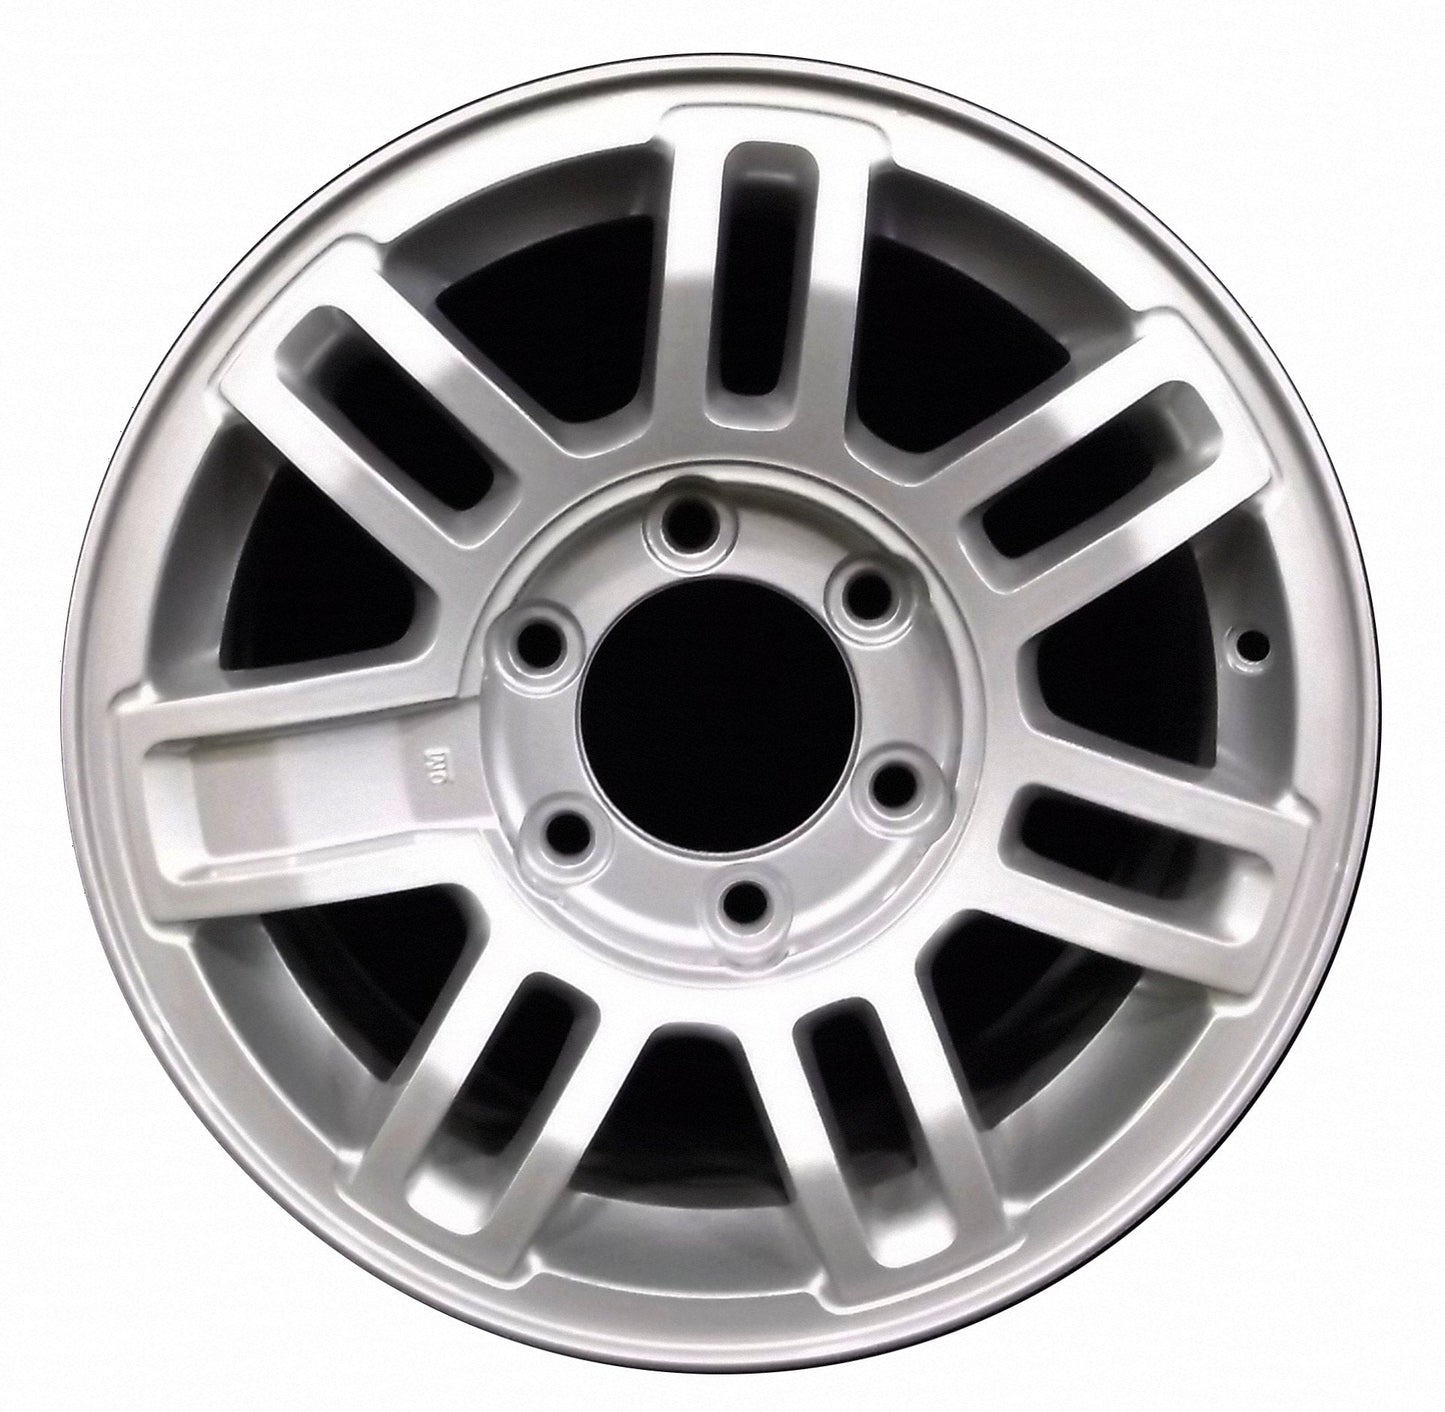 Hummer H3  2006, 2007, 2008, 2009, 2010 Factory OEM Car Wheel Size 16x7.5 Alloy WAO.6304.PS02.FF